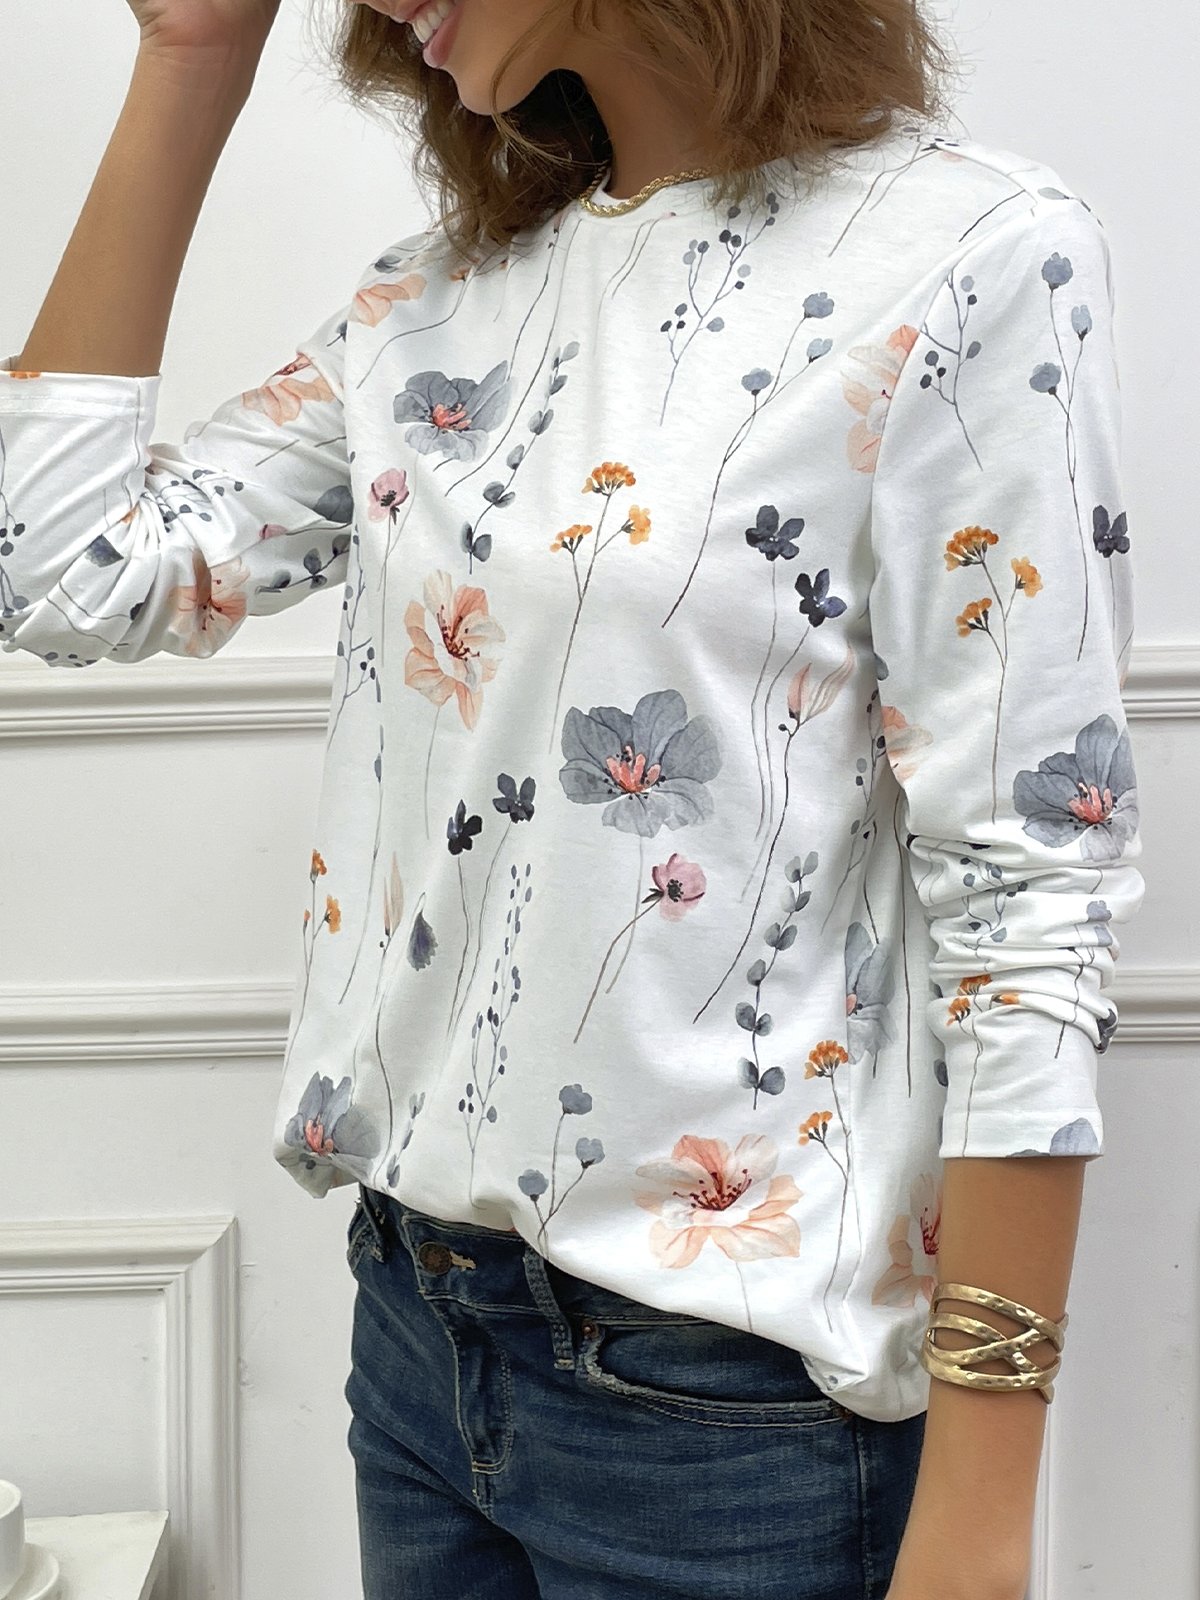 Women Casual Floral Crew Neck Long Sleeve Top